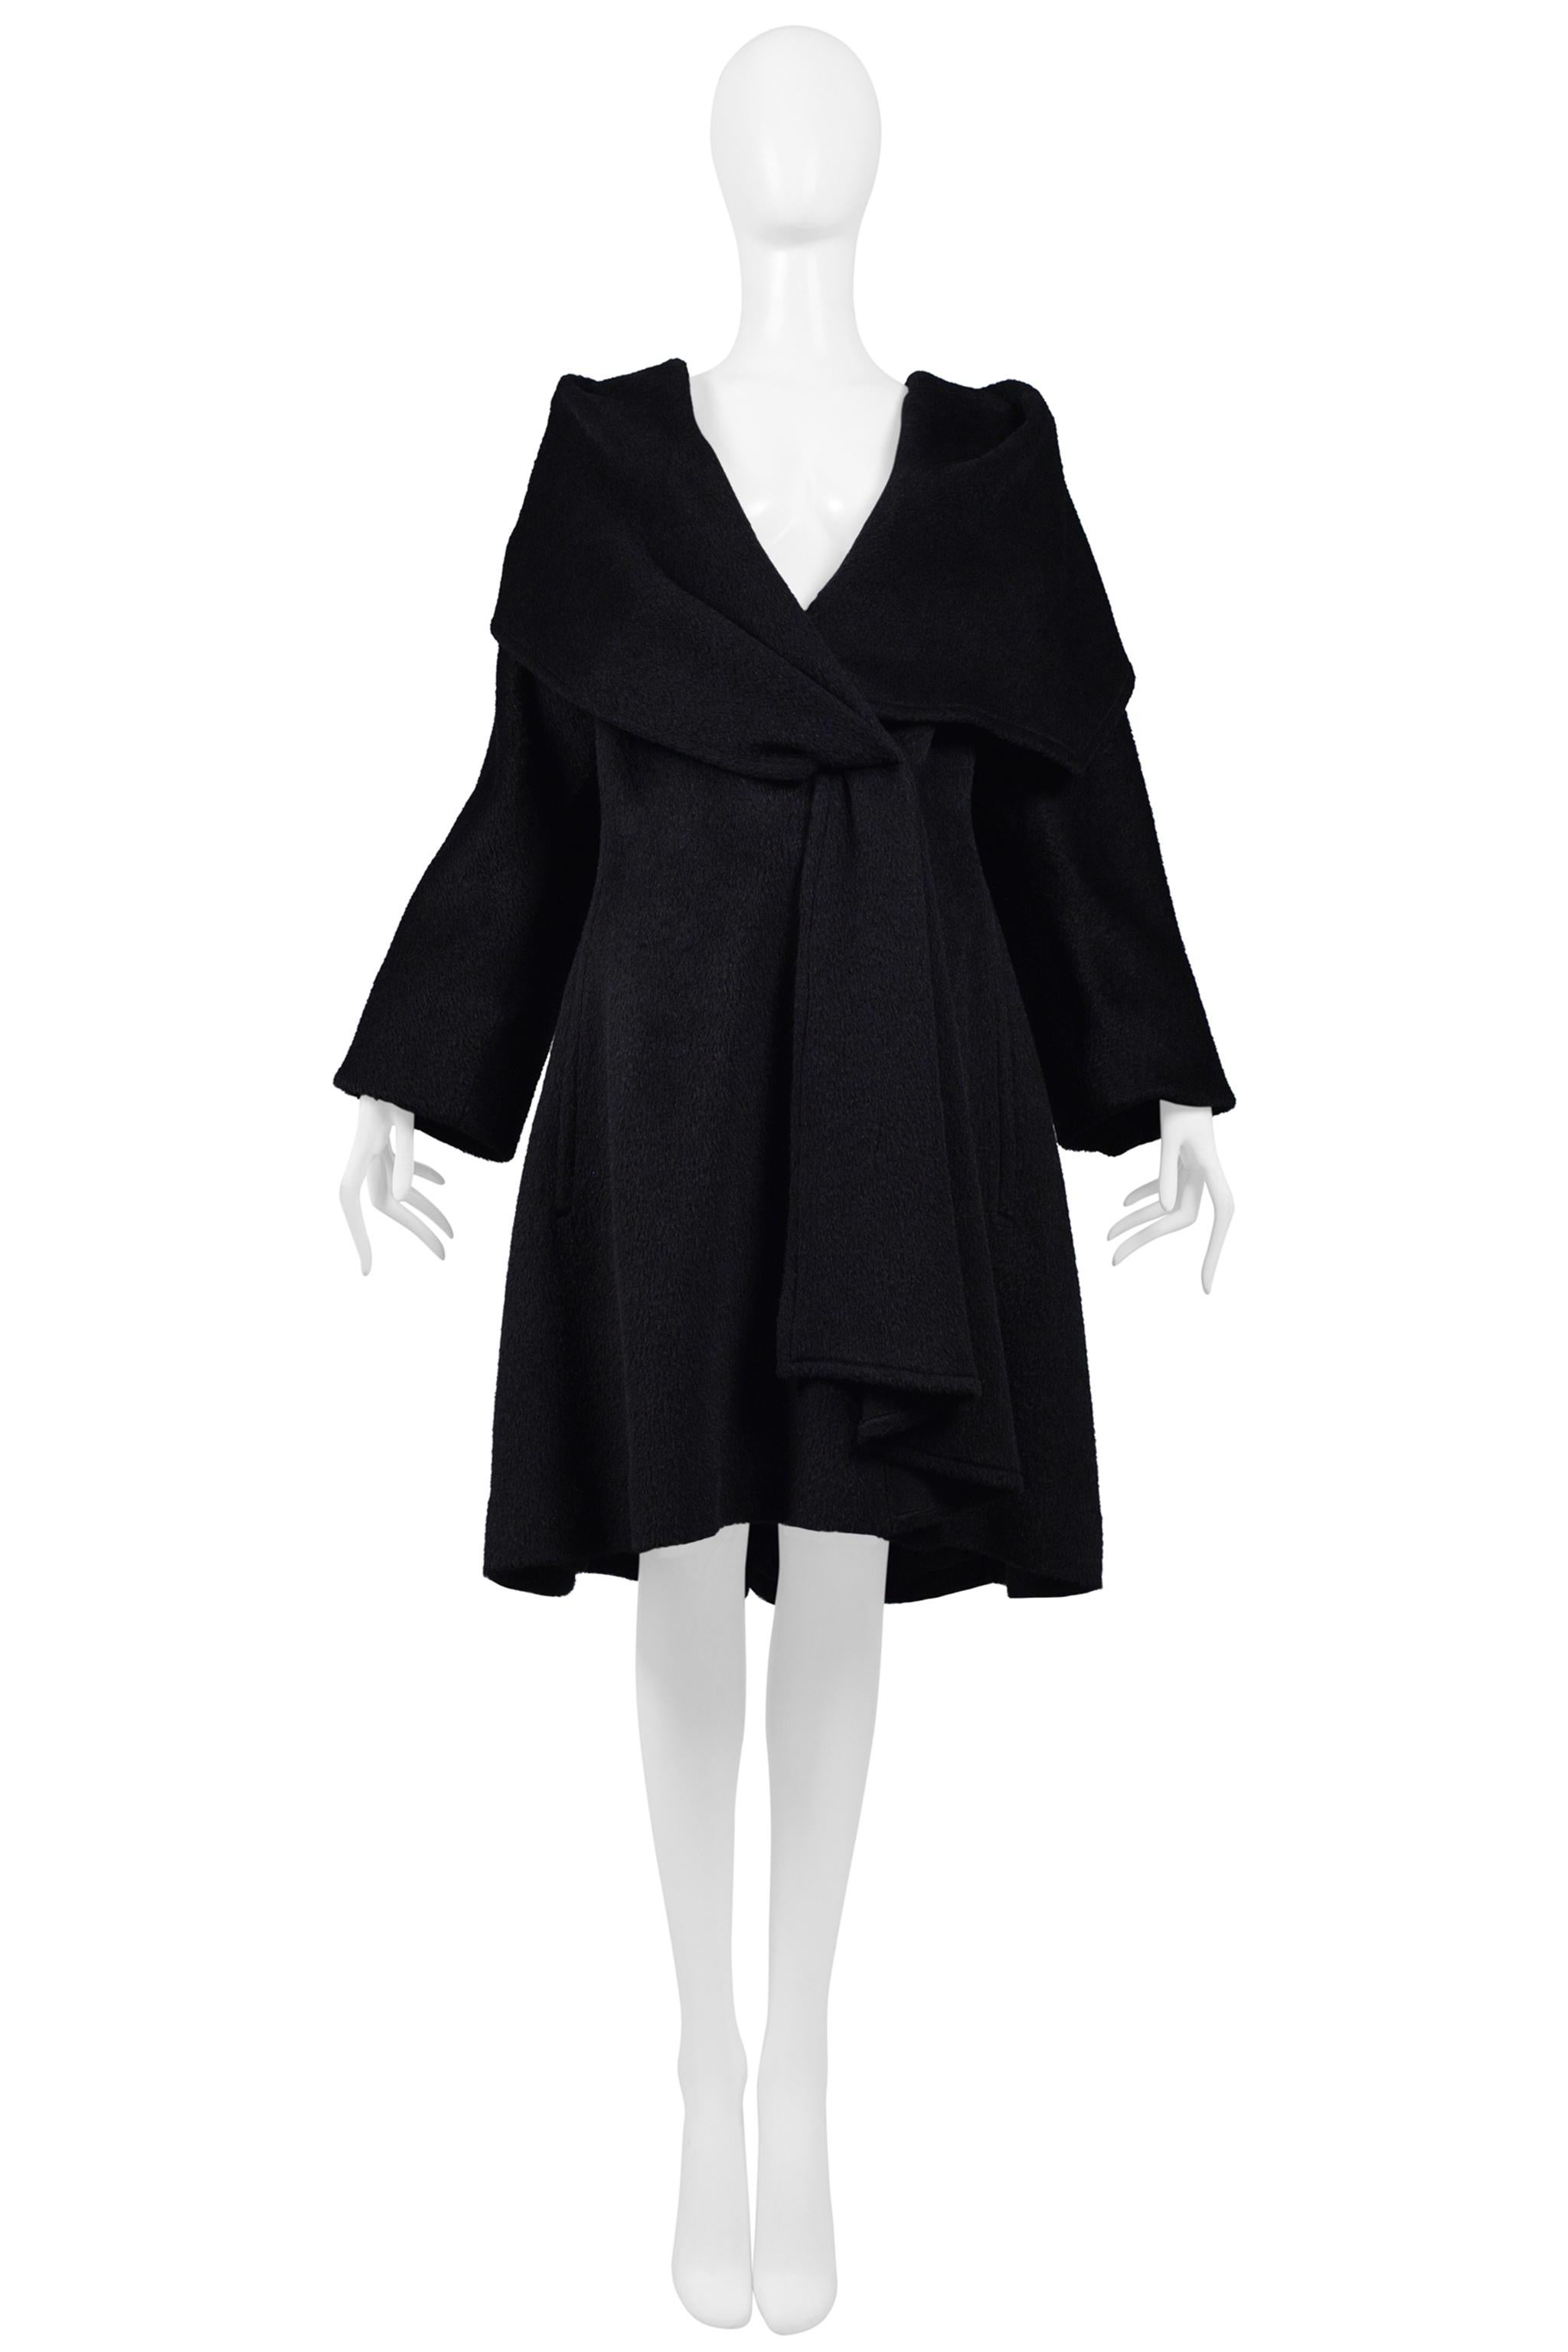 Resurrection Vintage is thrilled to offer a vintage statement Thierry Mugler black hooded cape coat featuring a dramatic hood and collar with folded detail at front, invisible button front closure, side pockets, gathered fabric on hood, long sleeves